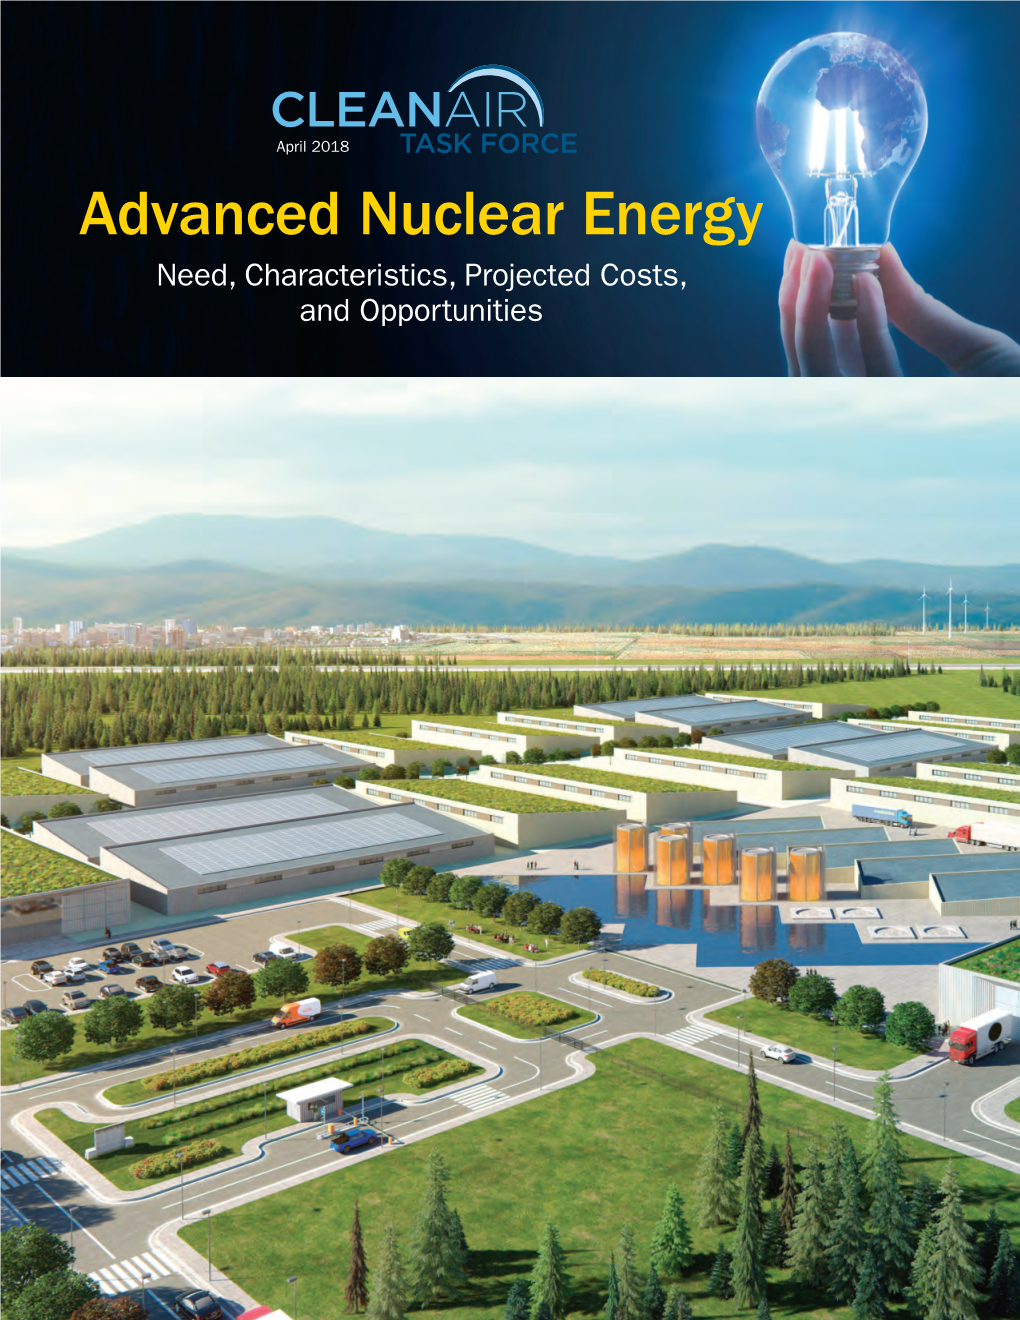 Advanced Nuclear Energy Need, Characteristics, Projected Costs, and Opportunities Image Credit: Third Way/Gensler”